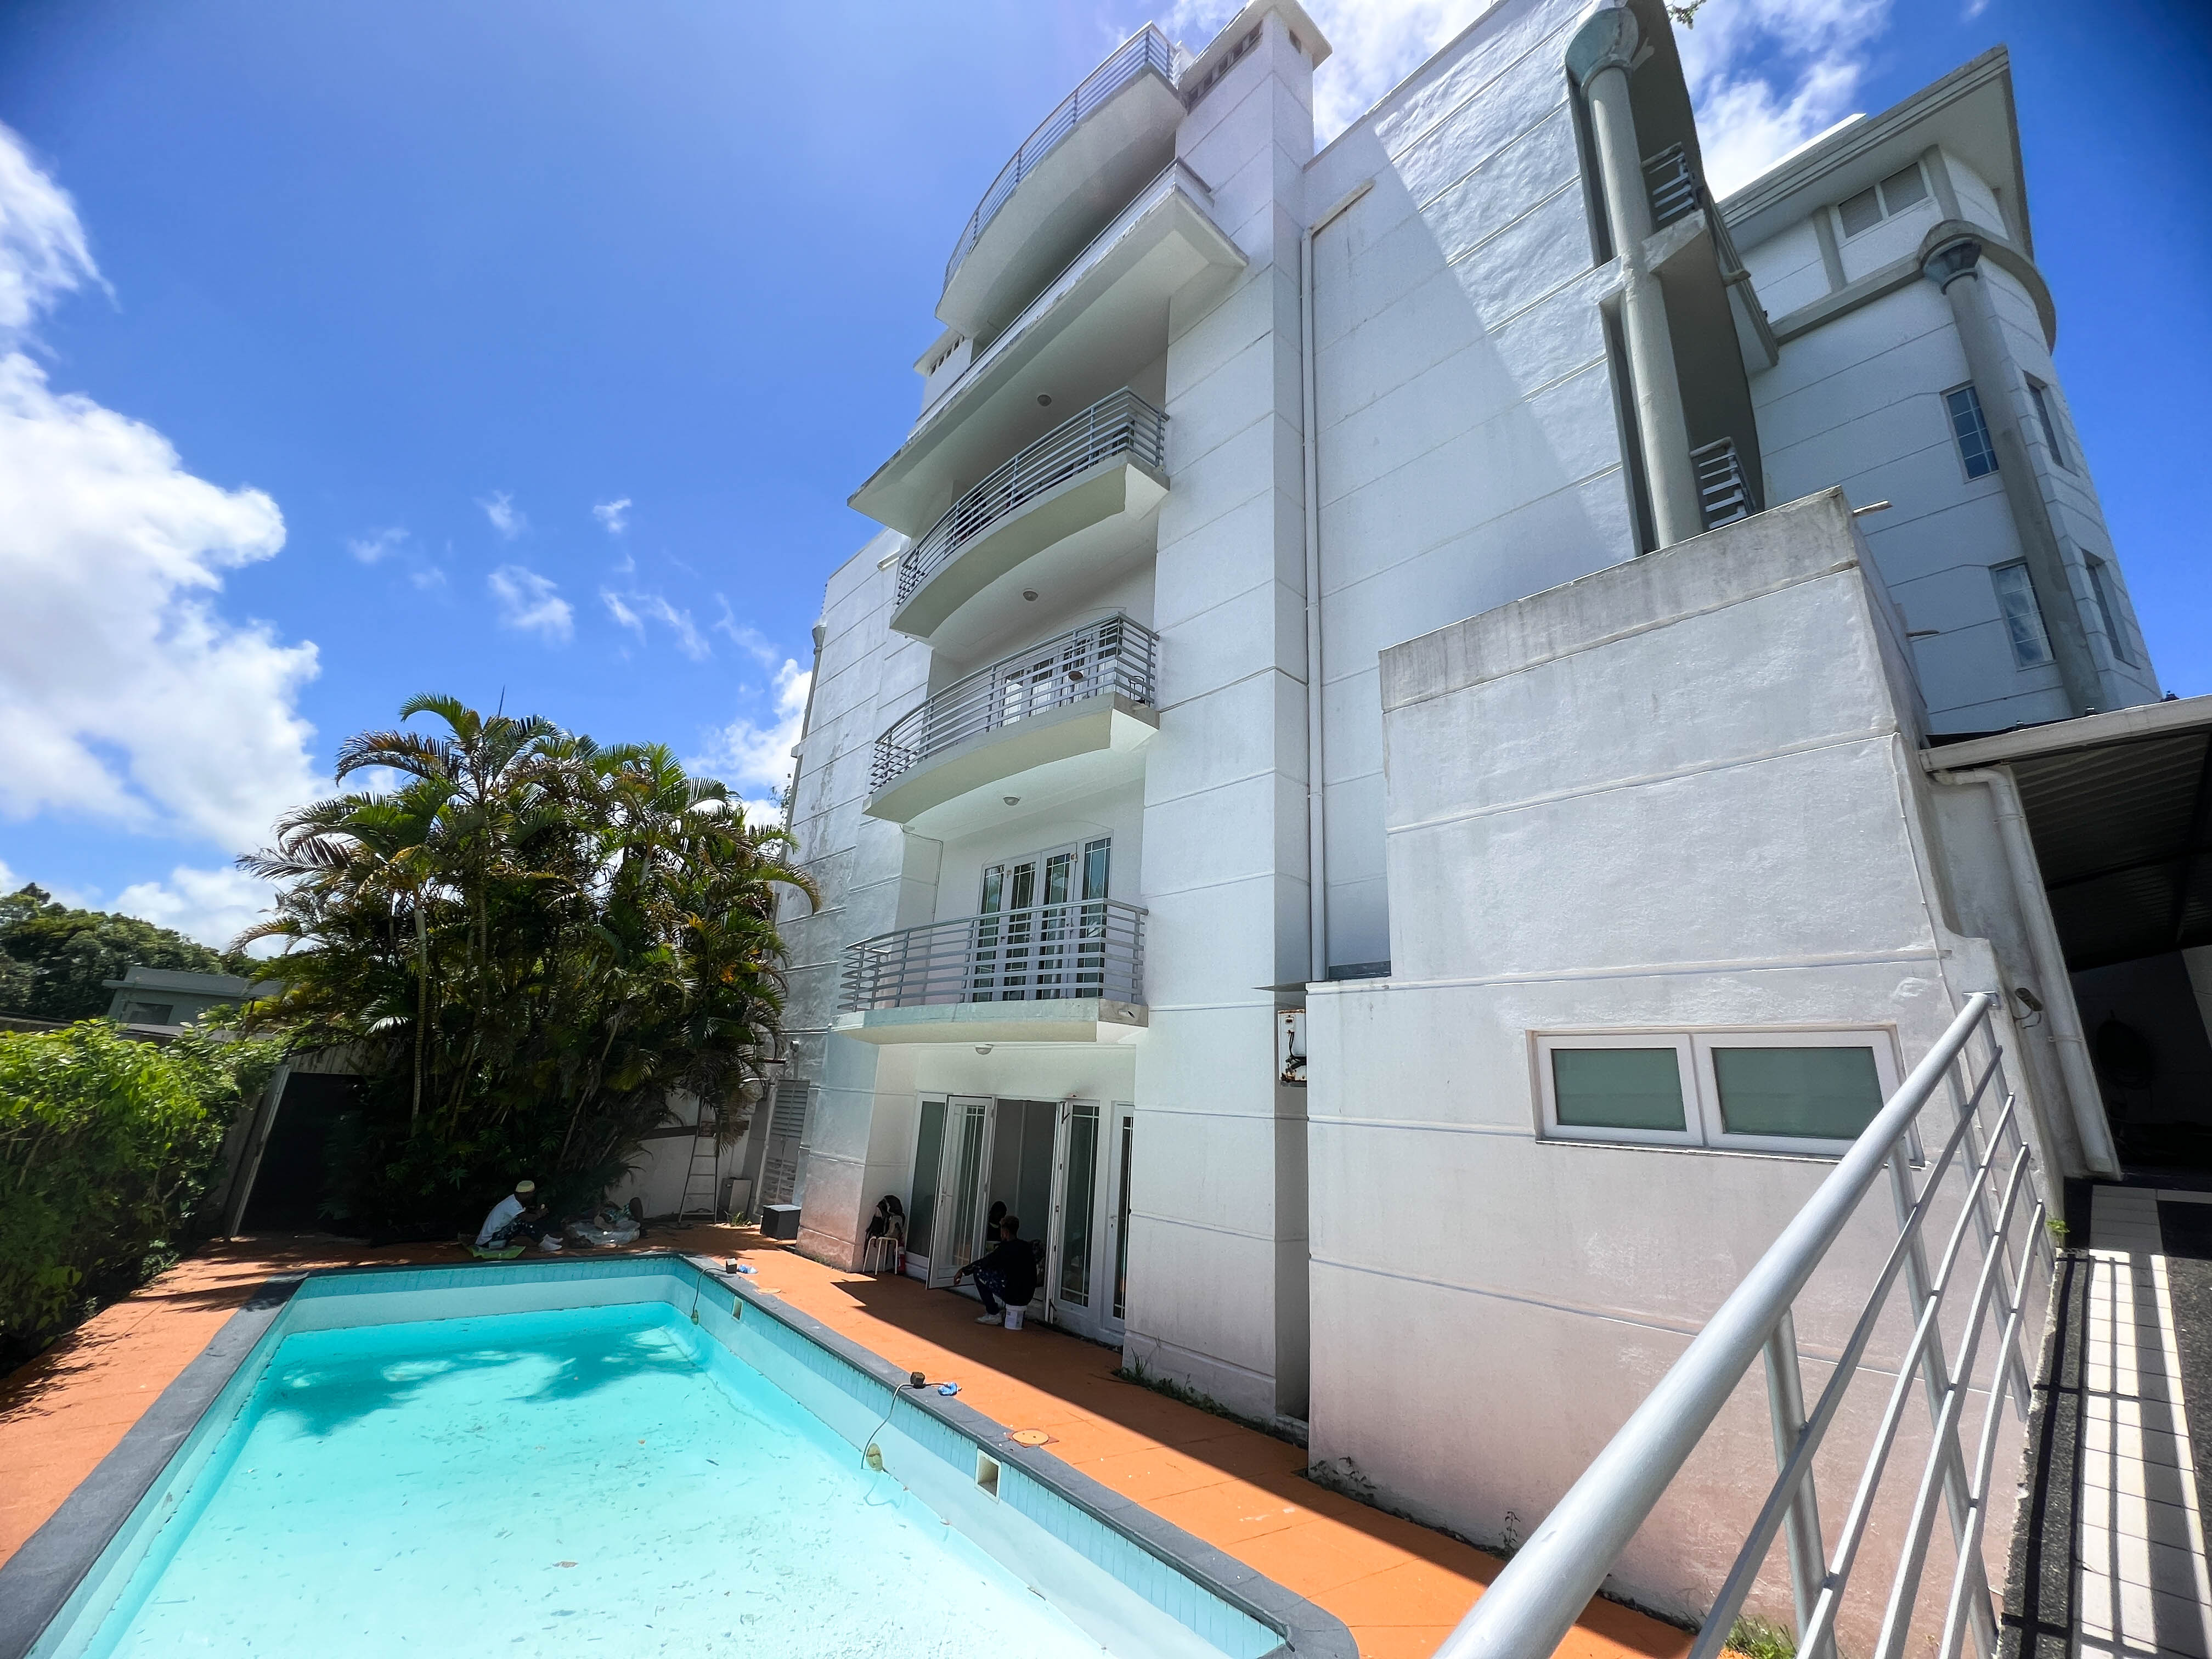 ON SALE - 3-BEDROOM APARTMENT - FLOREAL